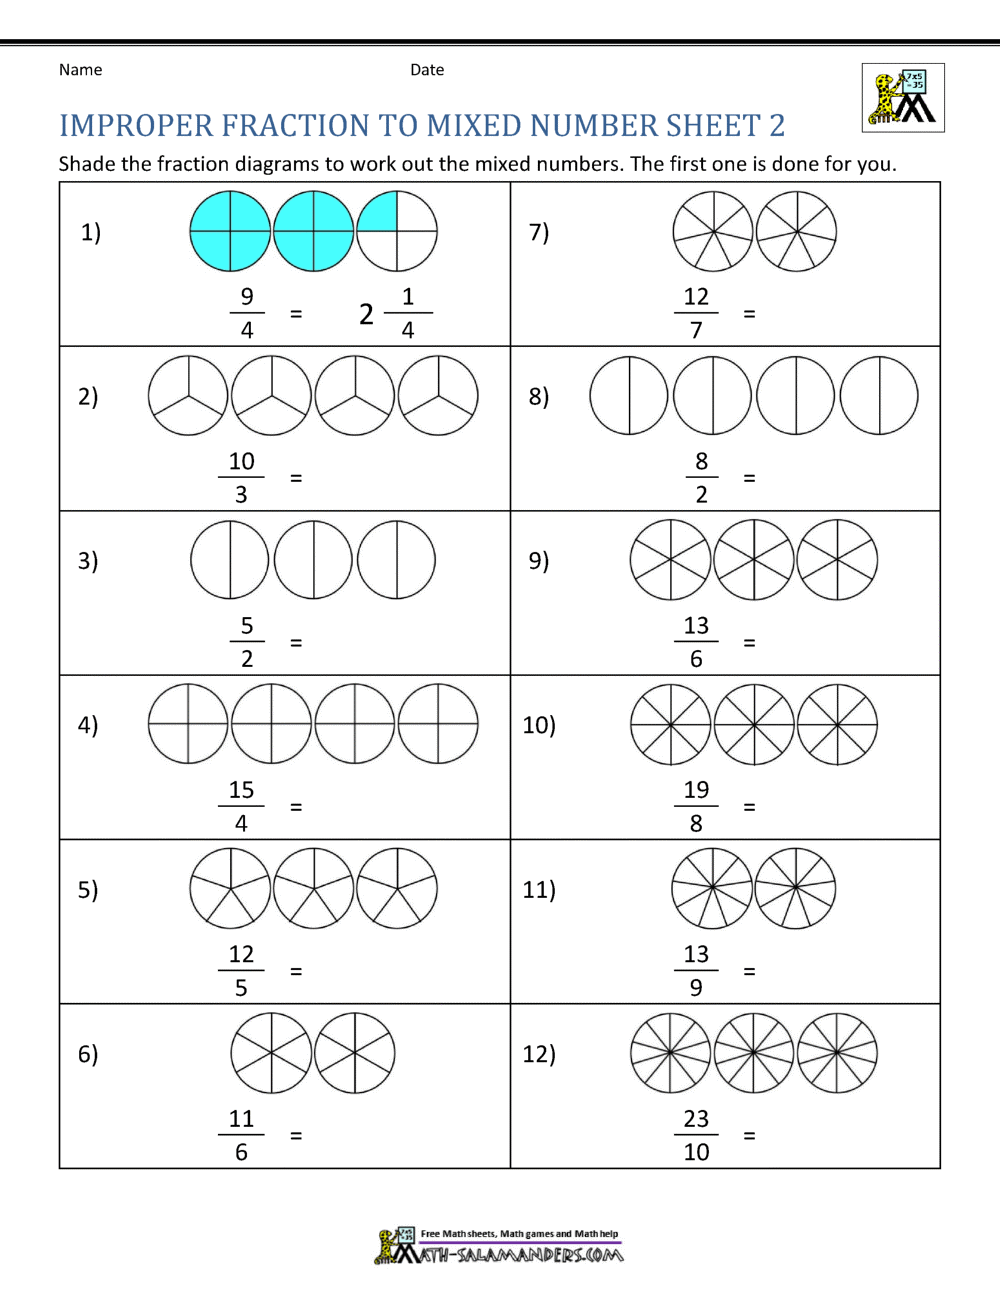 16-new-mixed-numbers-and-improper-fractions-worksheet